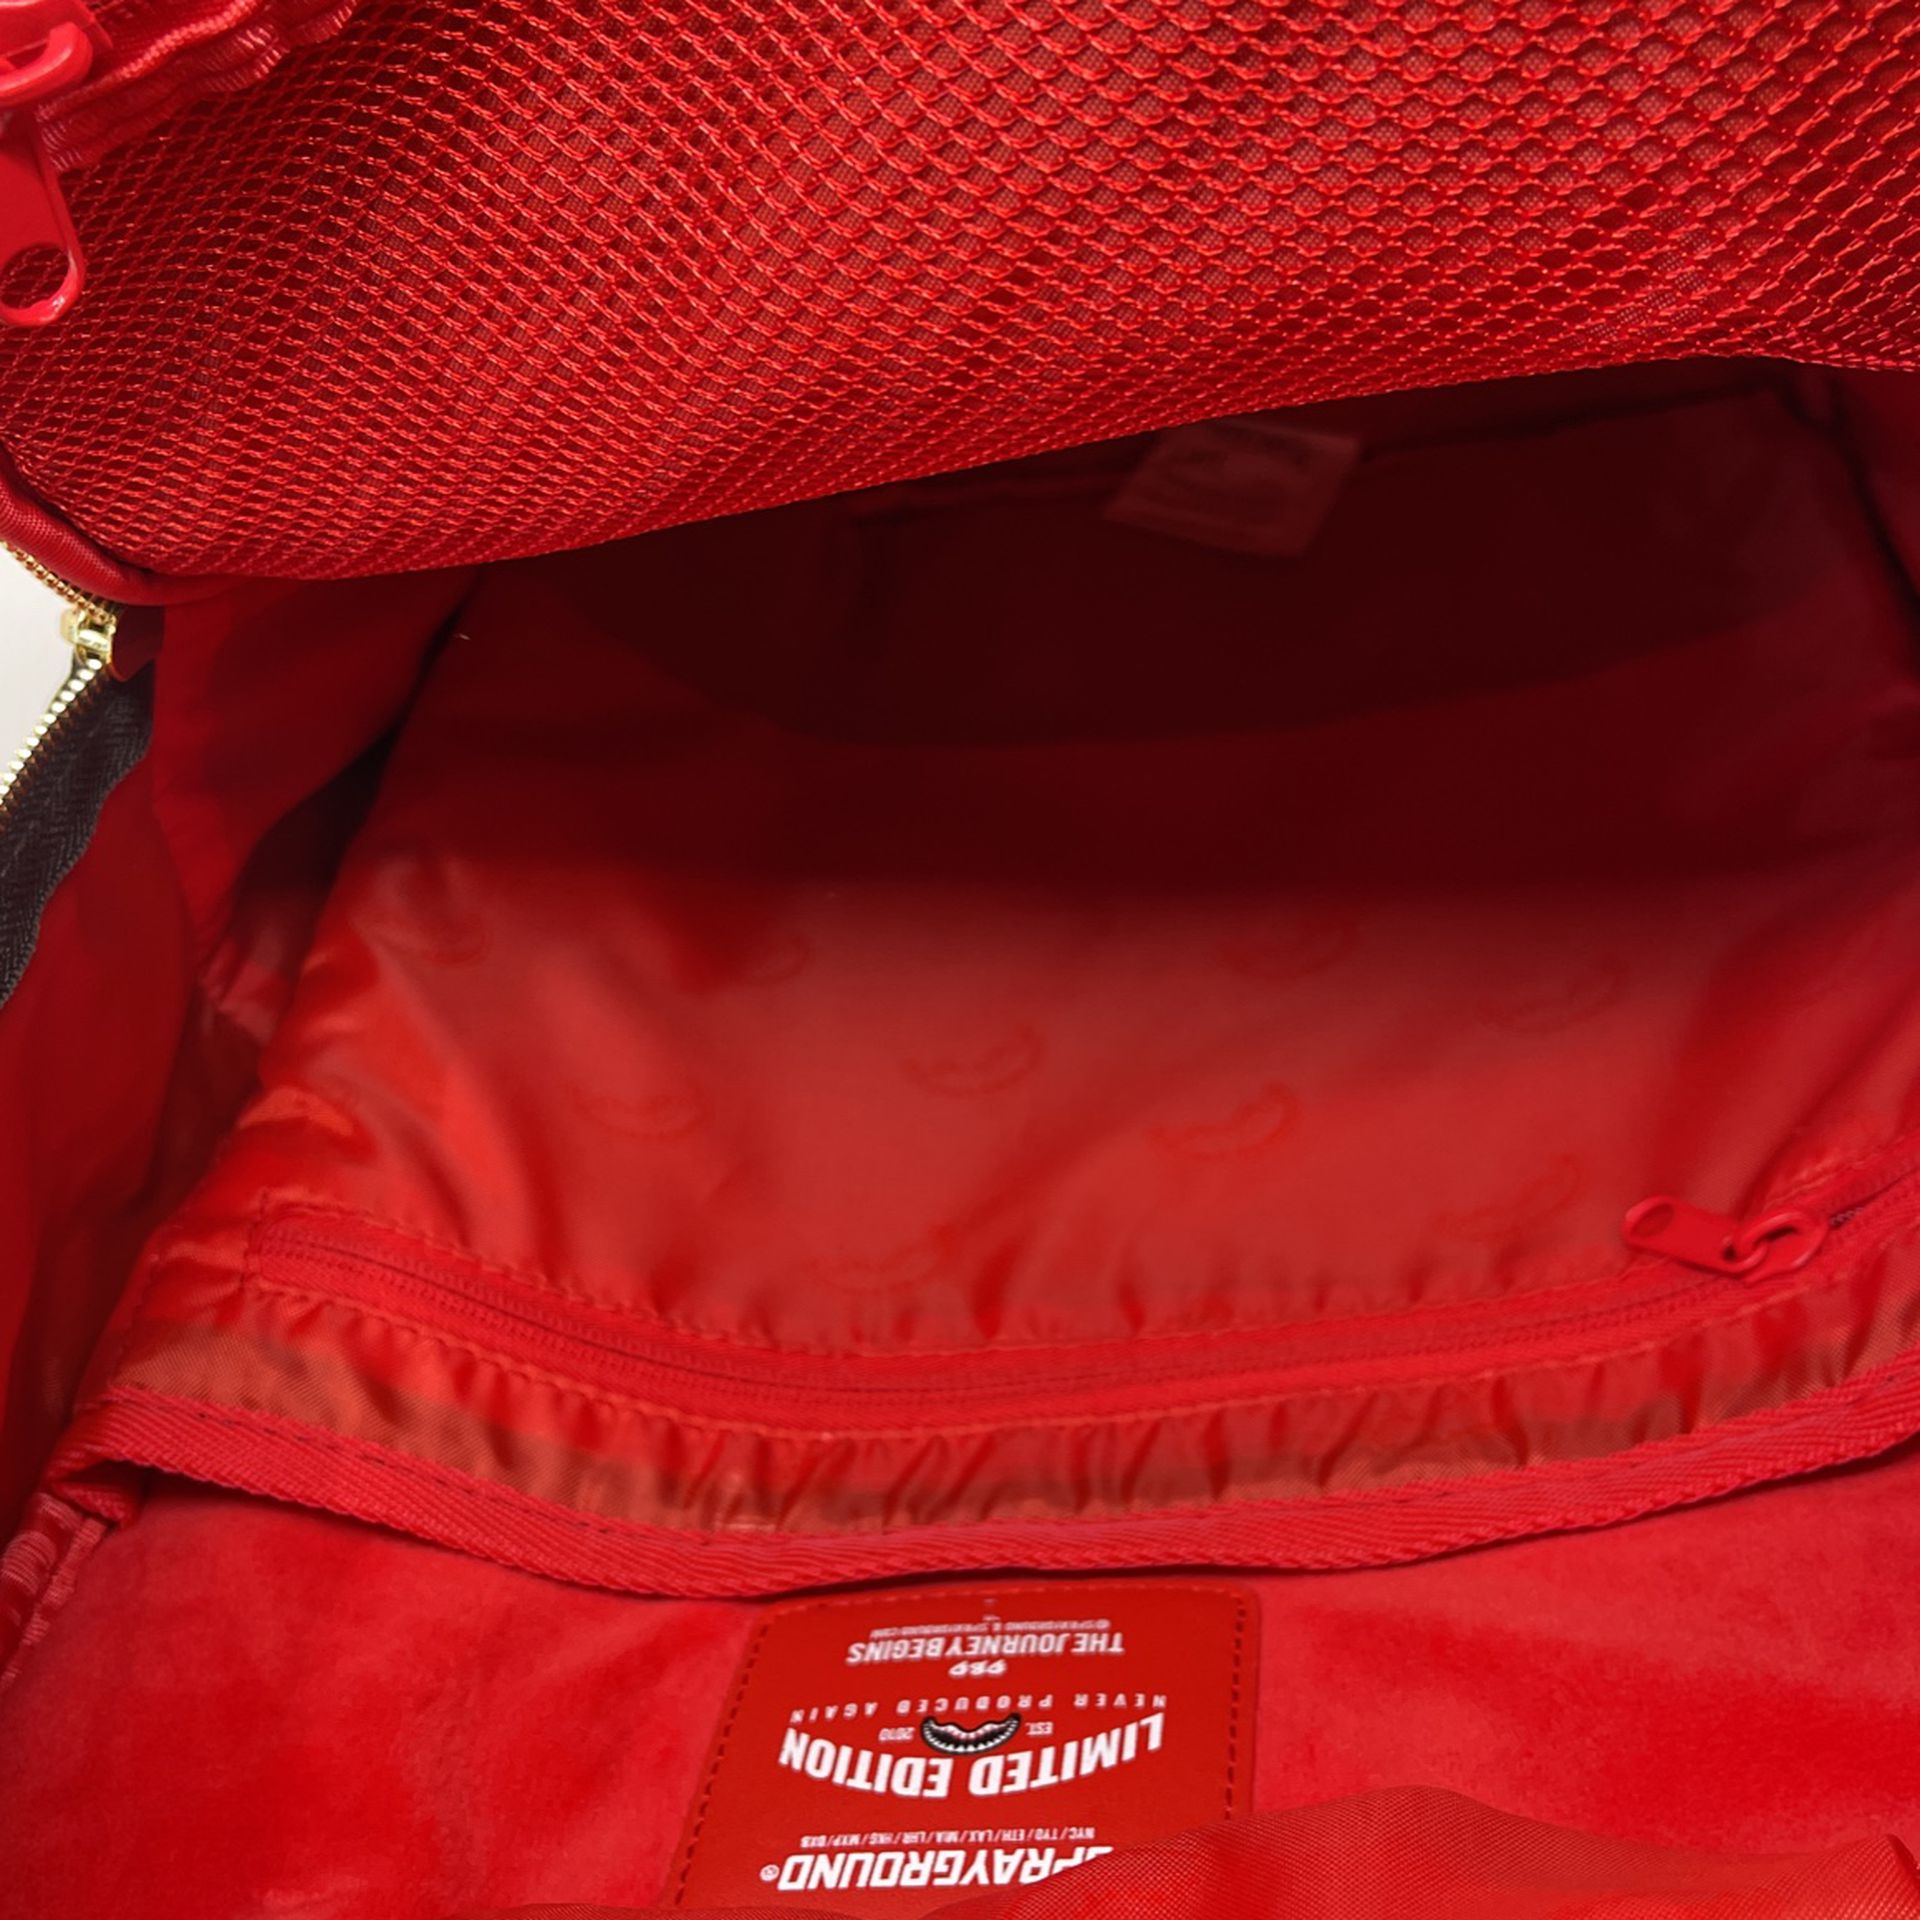 SPRAYGROUND RACEWAY HENNY BACKPACK (DLXV) for Sale in Chicago, IL